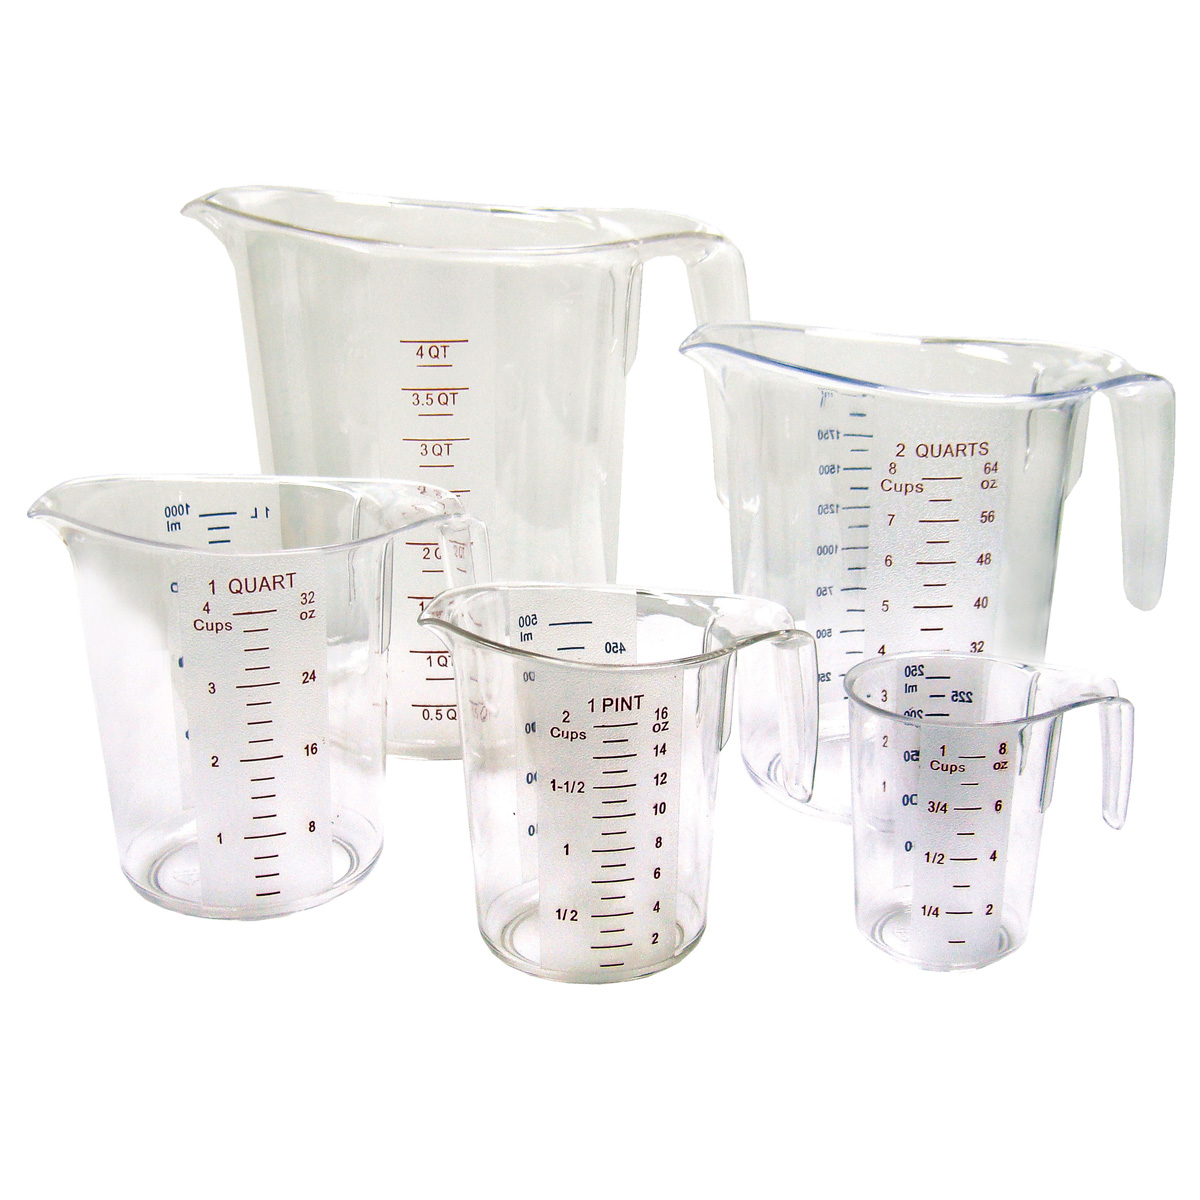 Winware by Winco PMCP-400 Polycarbonate Measuring Cup - 4 Qt. image 1